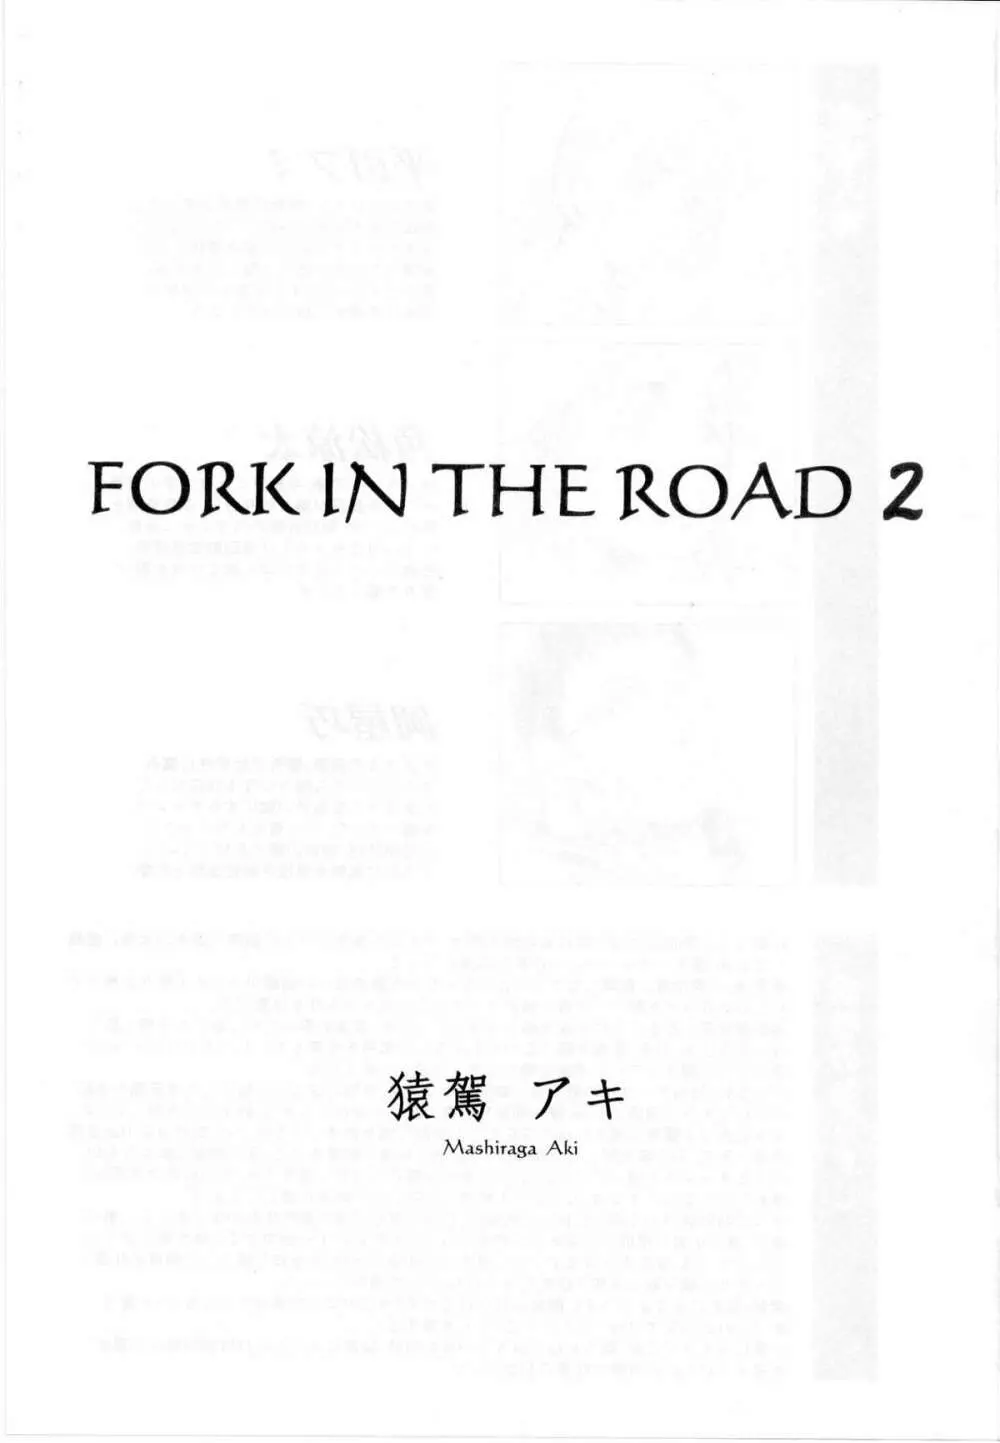 FORK IN THE ROAD 2 2ページ